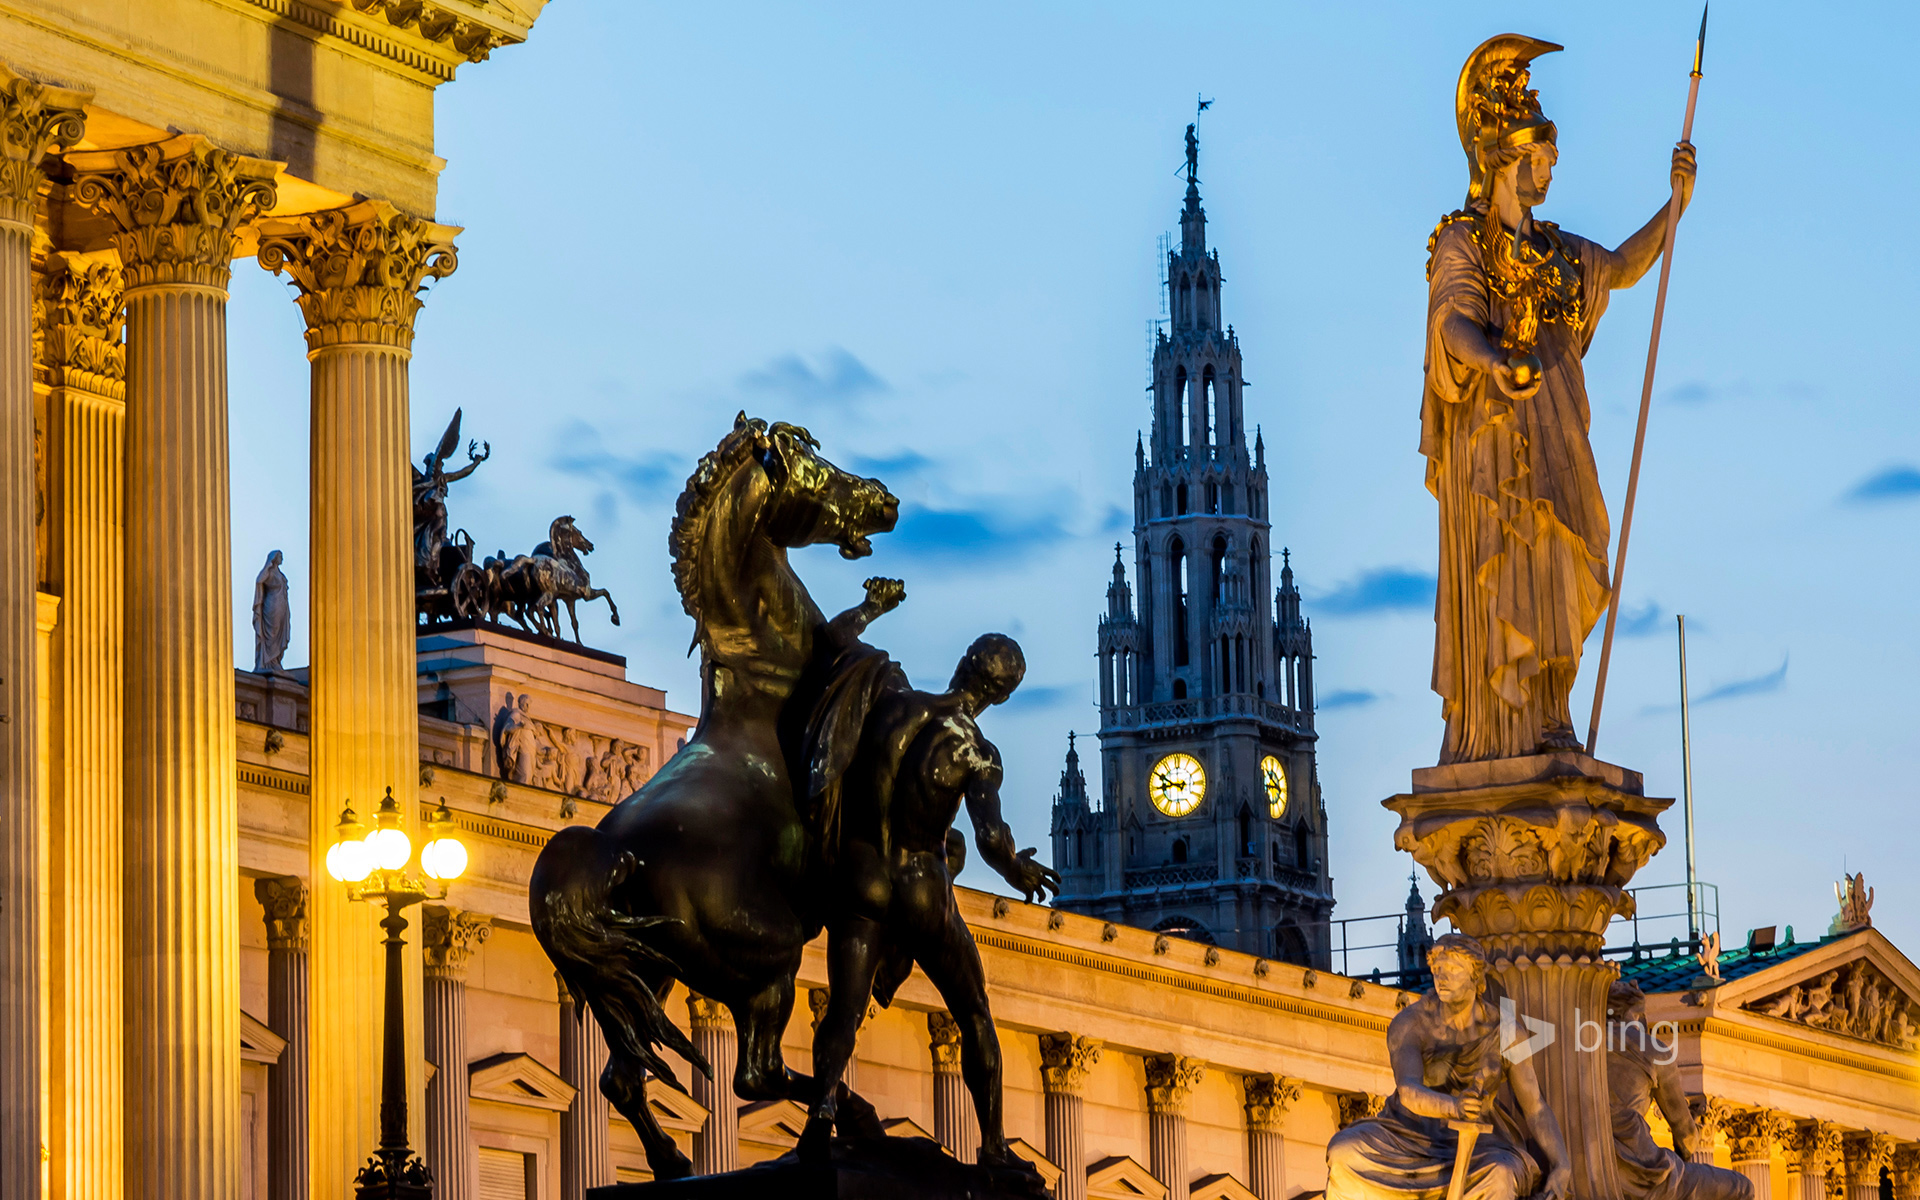 View to parliament building, town hall tower and statue of goddess Pallas Athene by twilight, Vienna, Austria